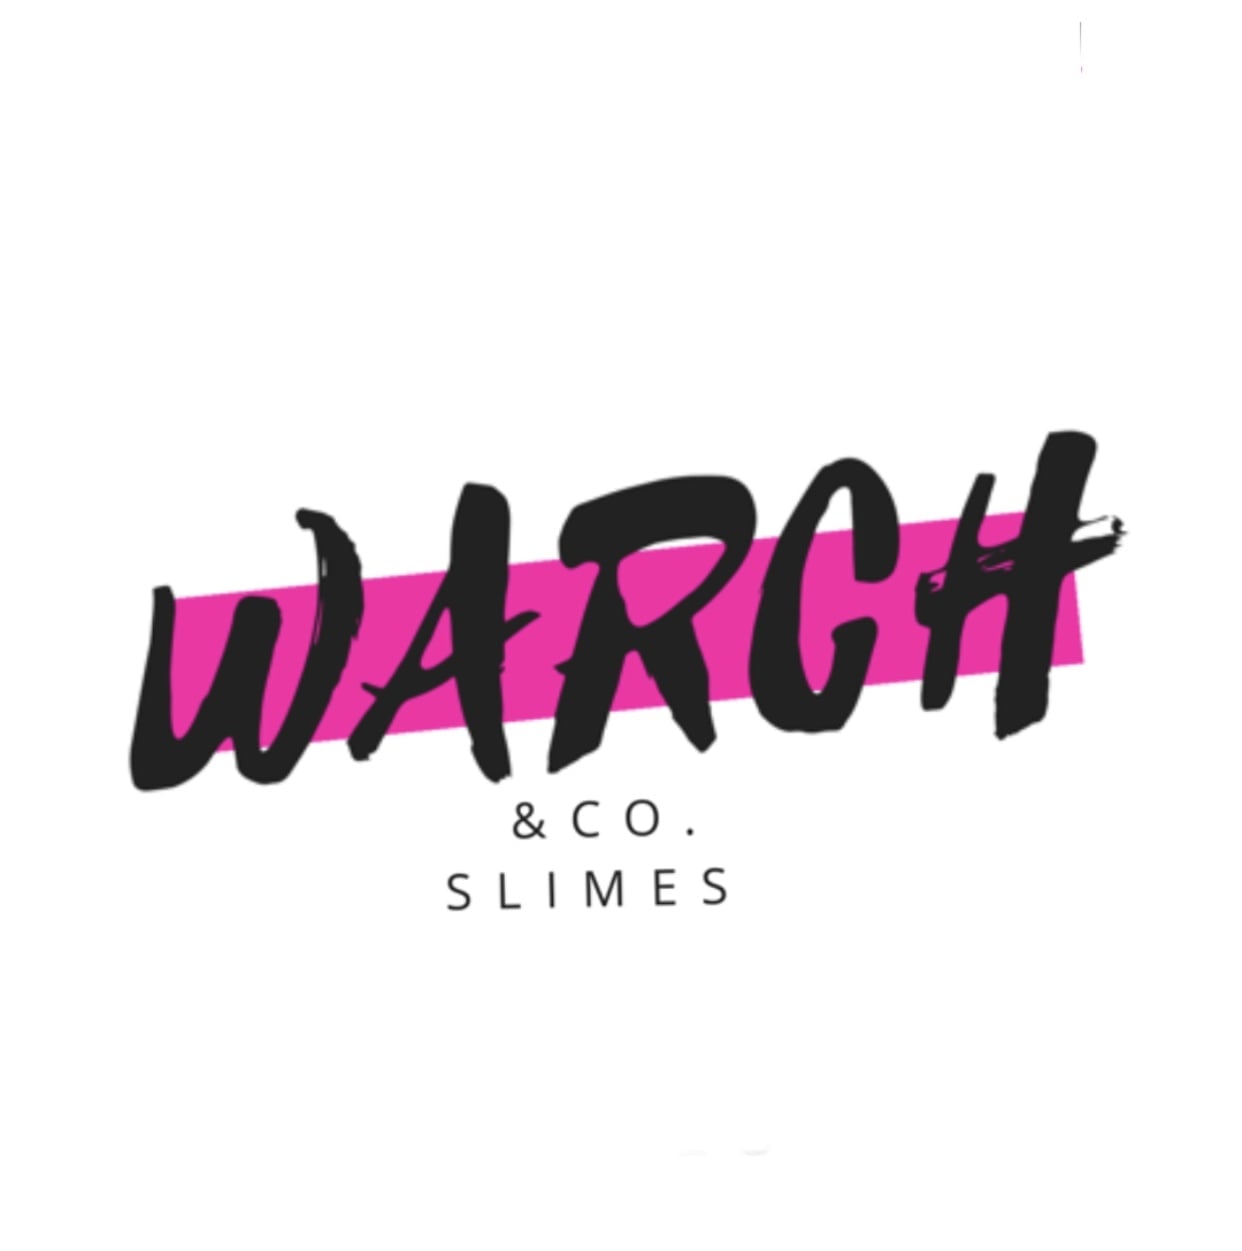 Warch and Co